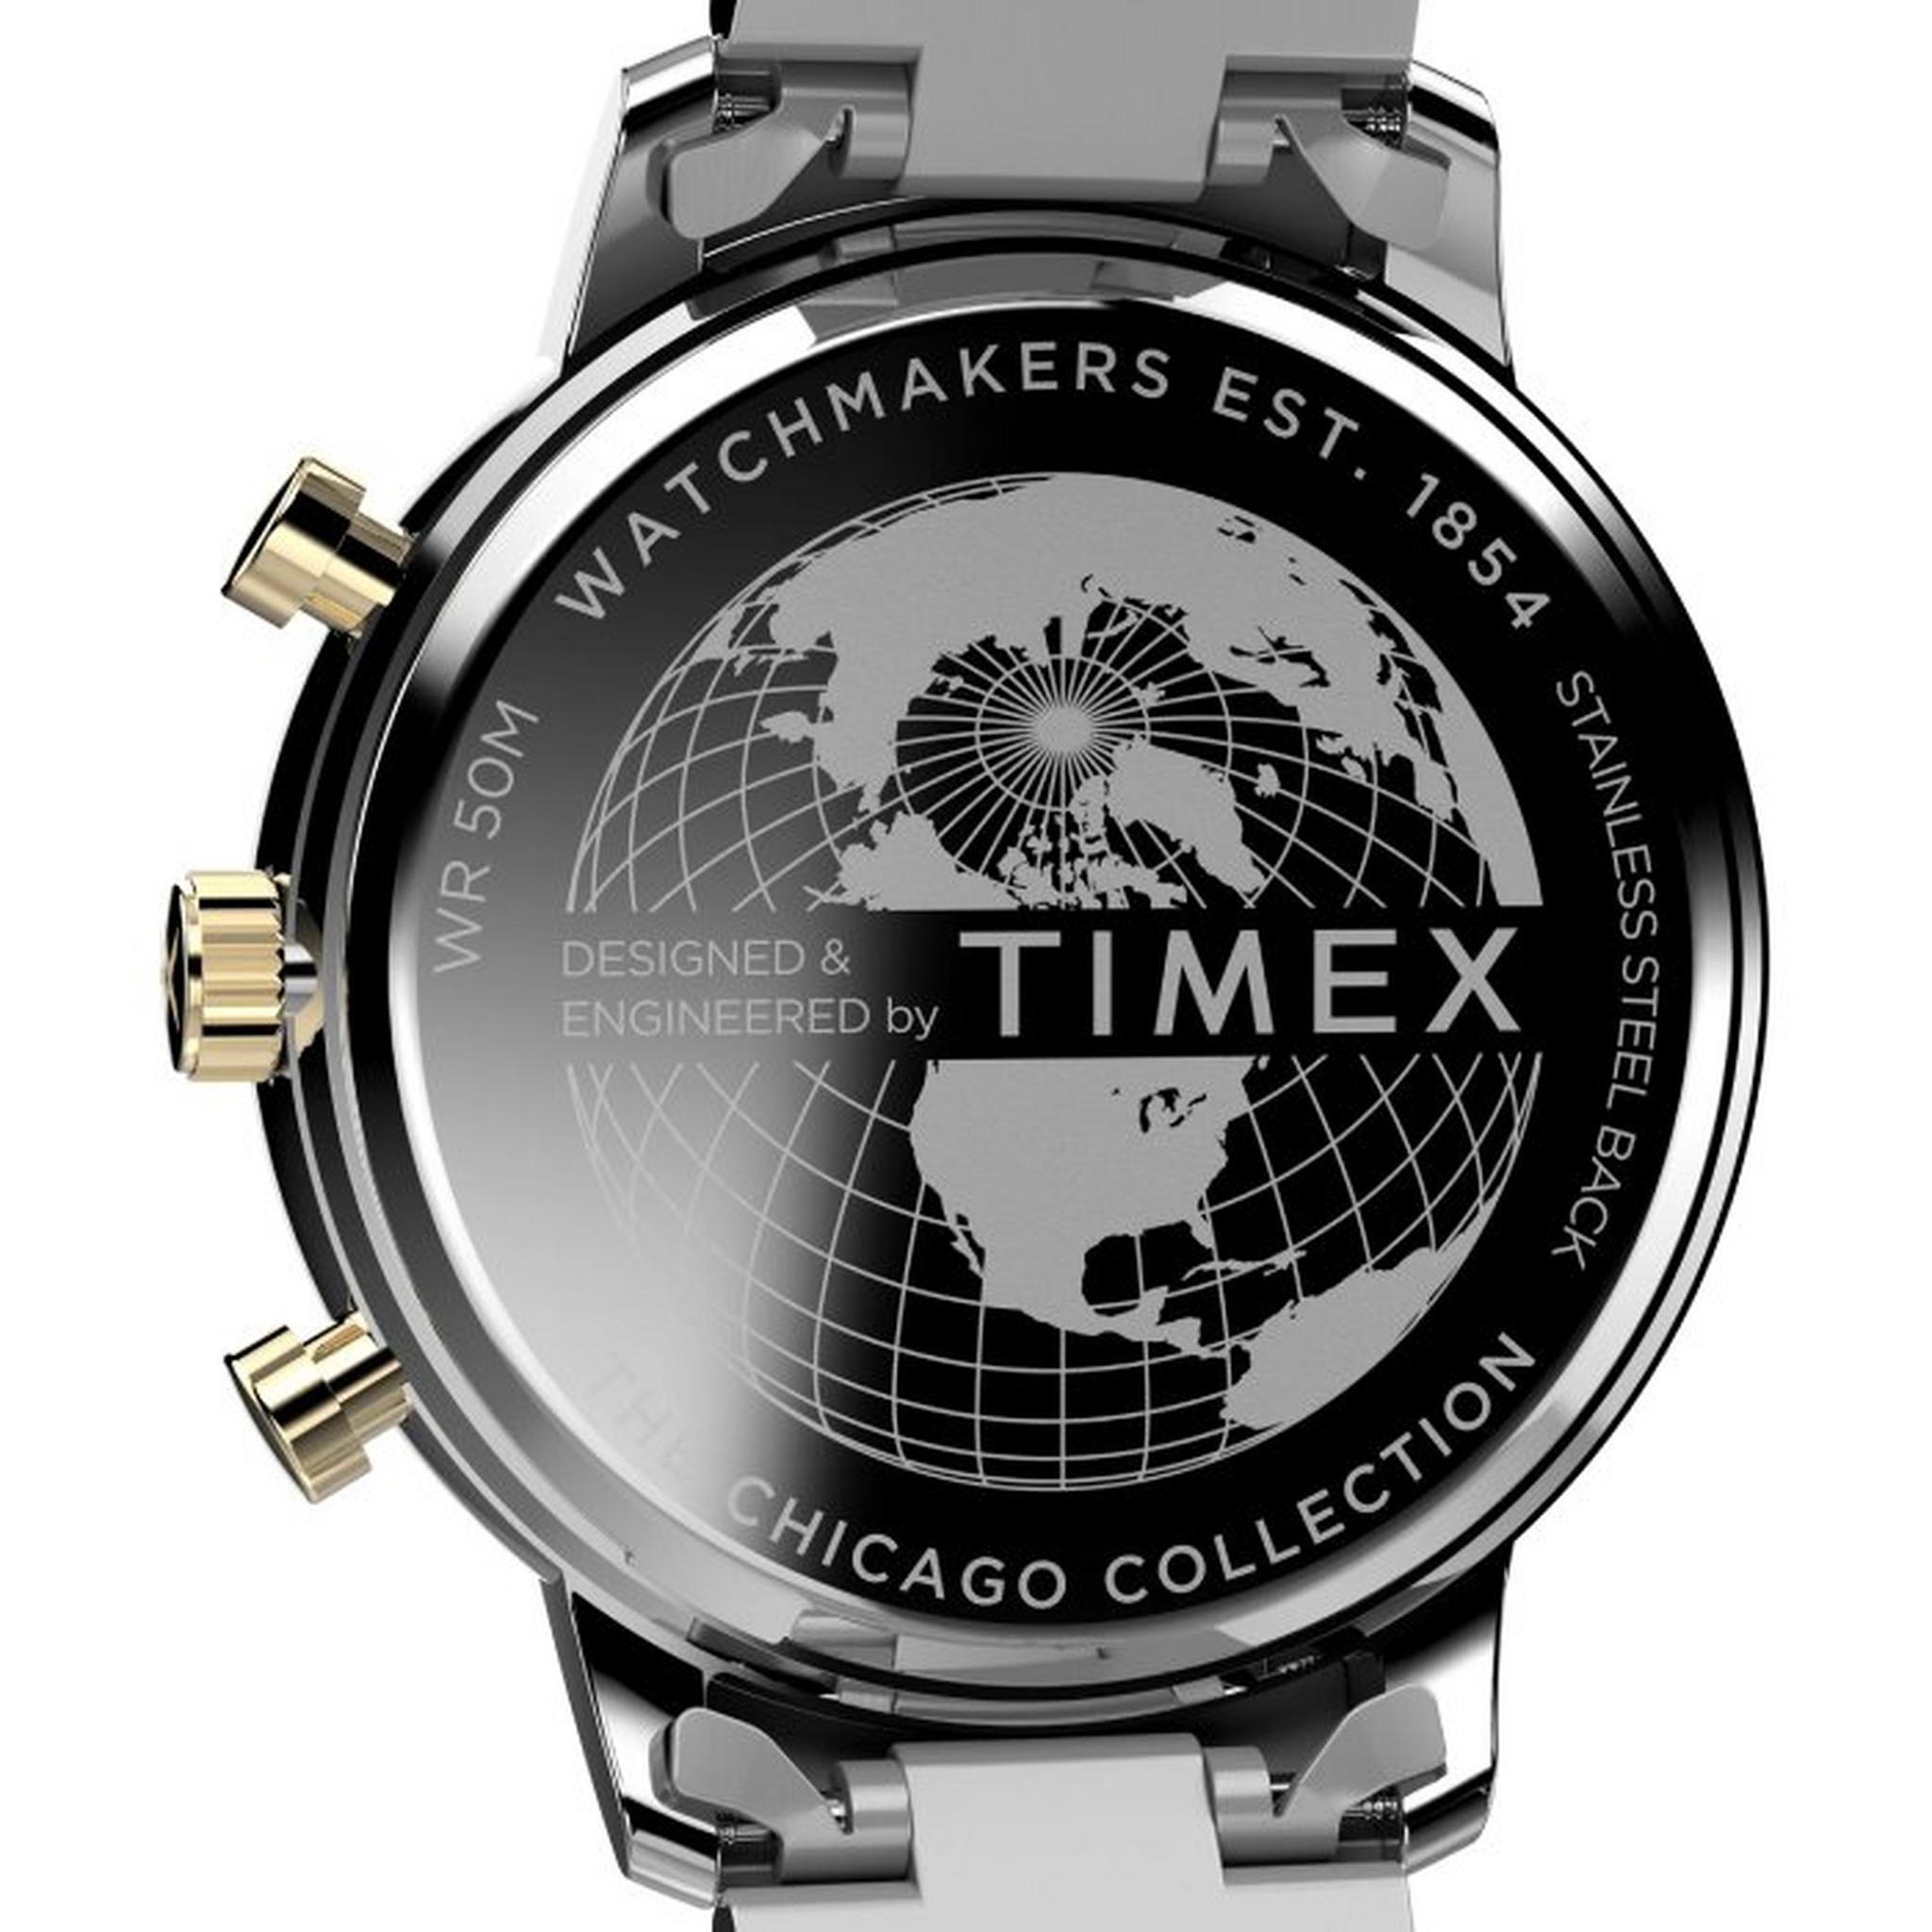 Timex Chicago Men’s Watch, 45mm, Stainless Steel Strap, Analog, TW2W13300 – Silver/Gold